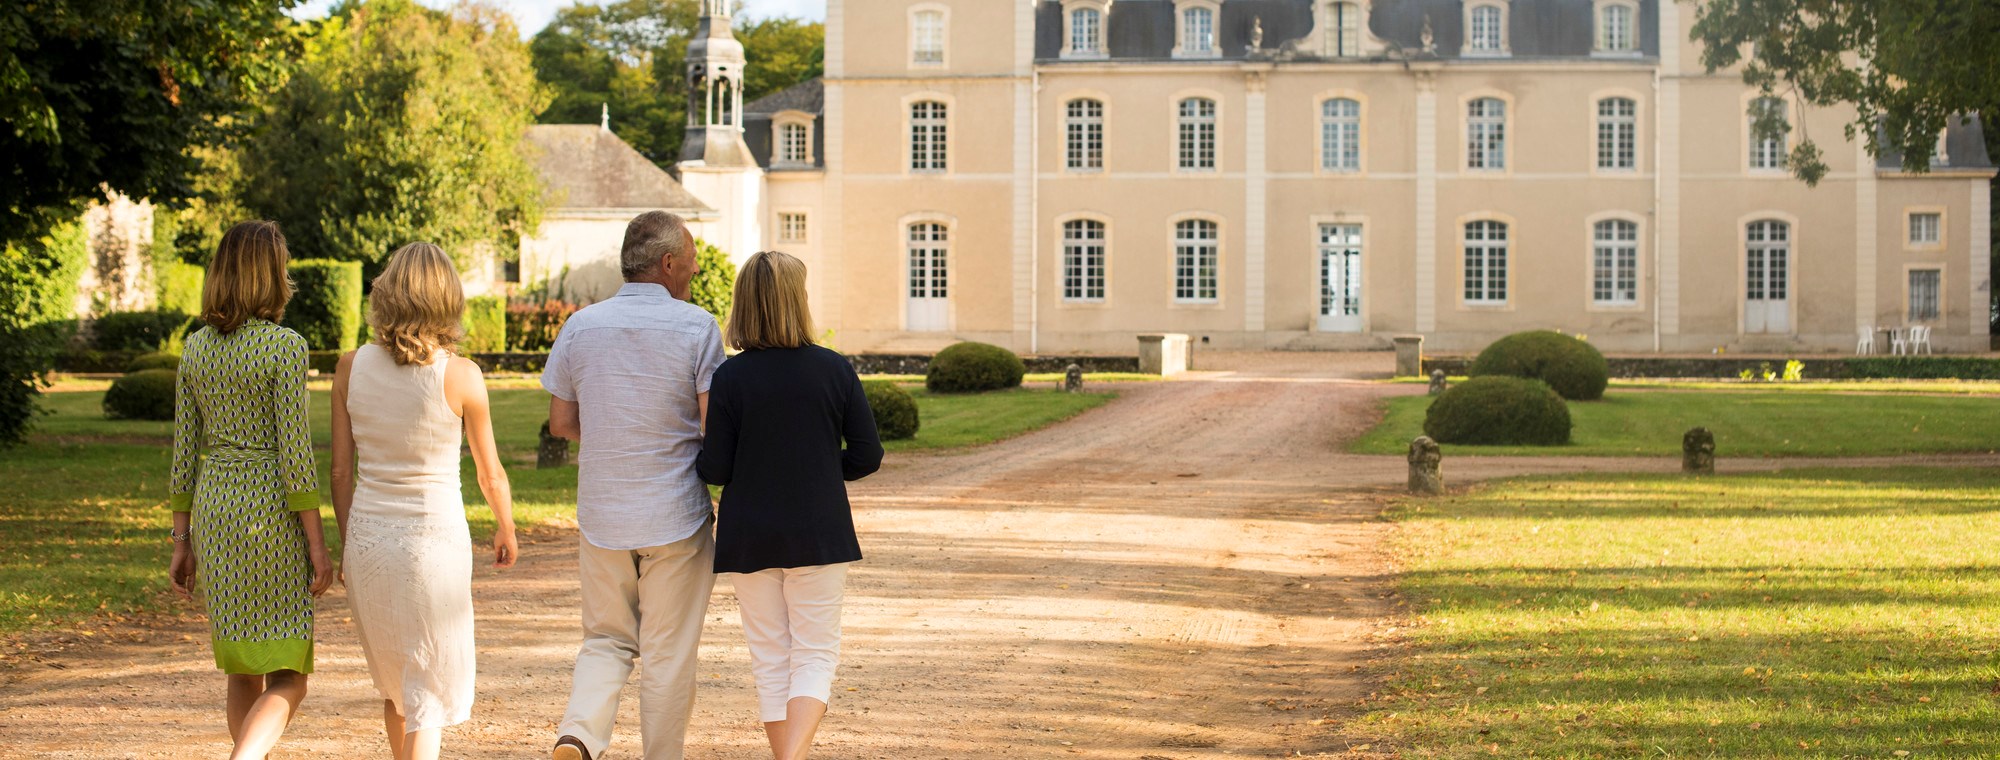 France Remy, Loire Valley Chateau D'eporce, Chateaux Manor Europe Couple Man Woman Mom And Daughters